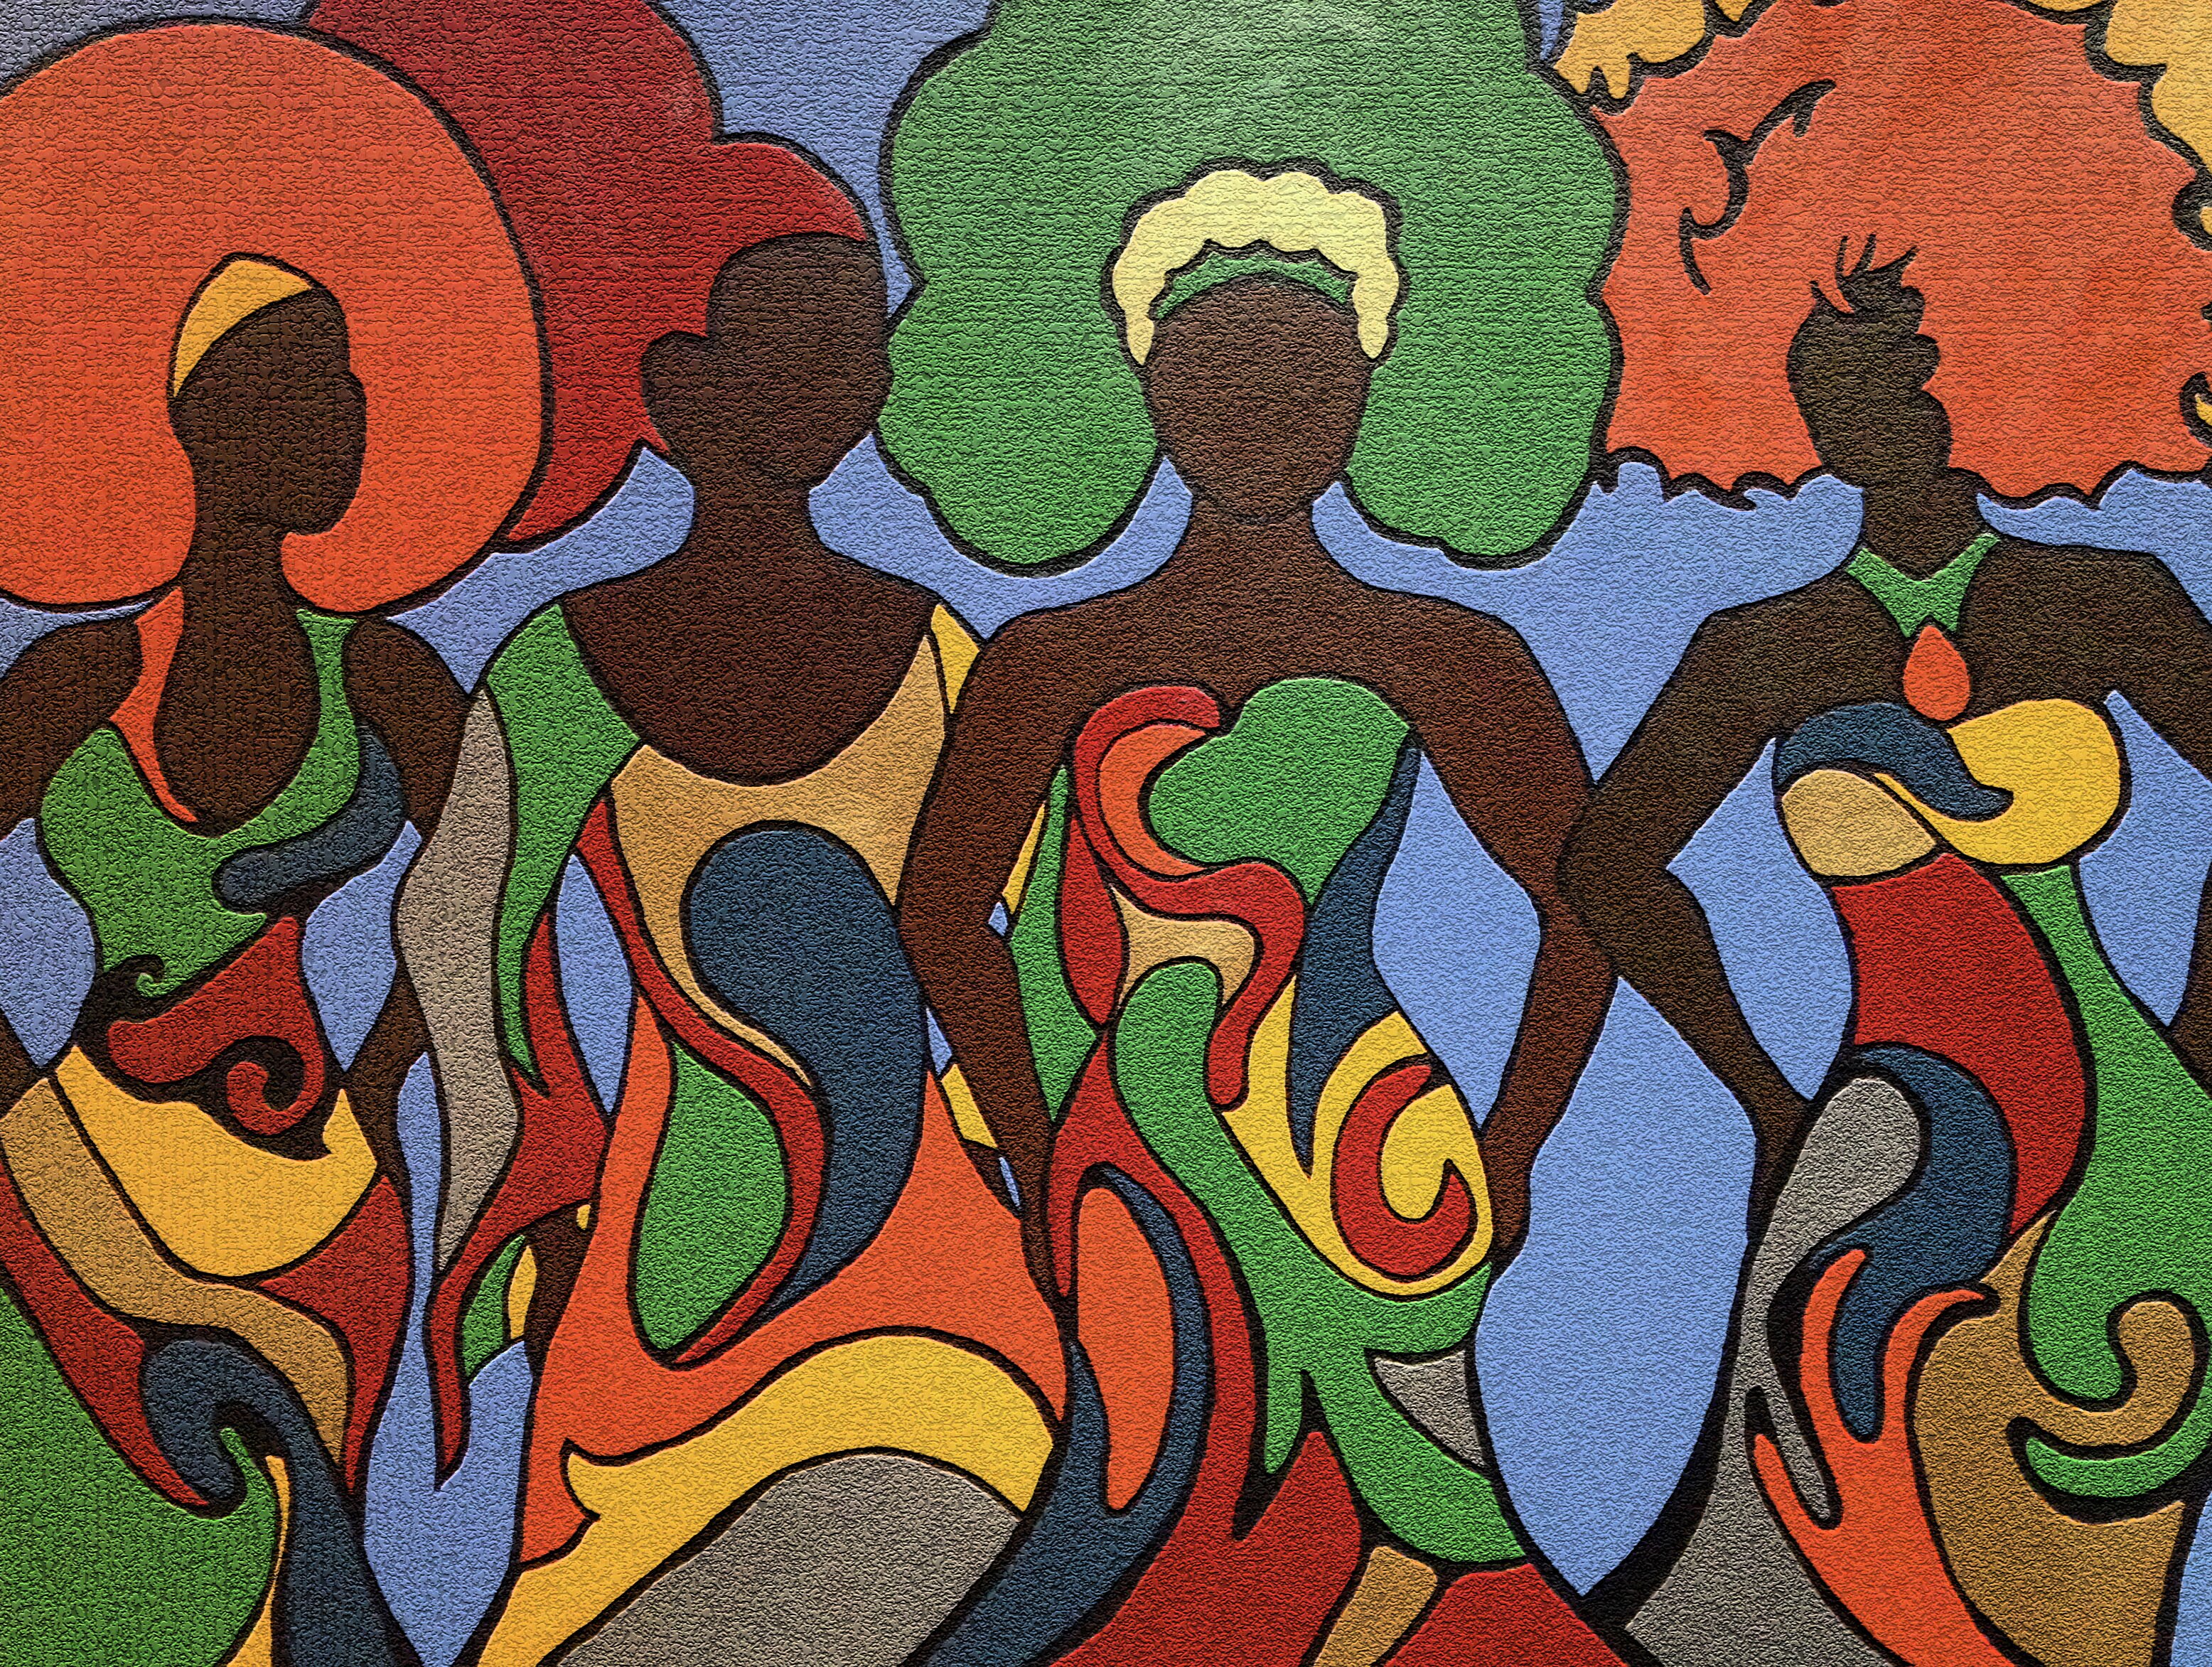 Adrienne Lewis; Sisterhood Of Hues, 2017, Original Painting Acrylic, 4 x 5 feet. Artwork description: 241 Sisters banding together in their own individuality of fashion with complimenting patterns.  Faceless figures host the hues of rich schemes signifying unity. ...